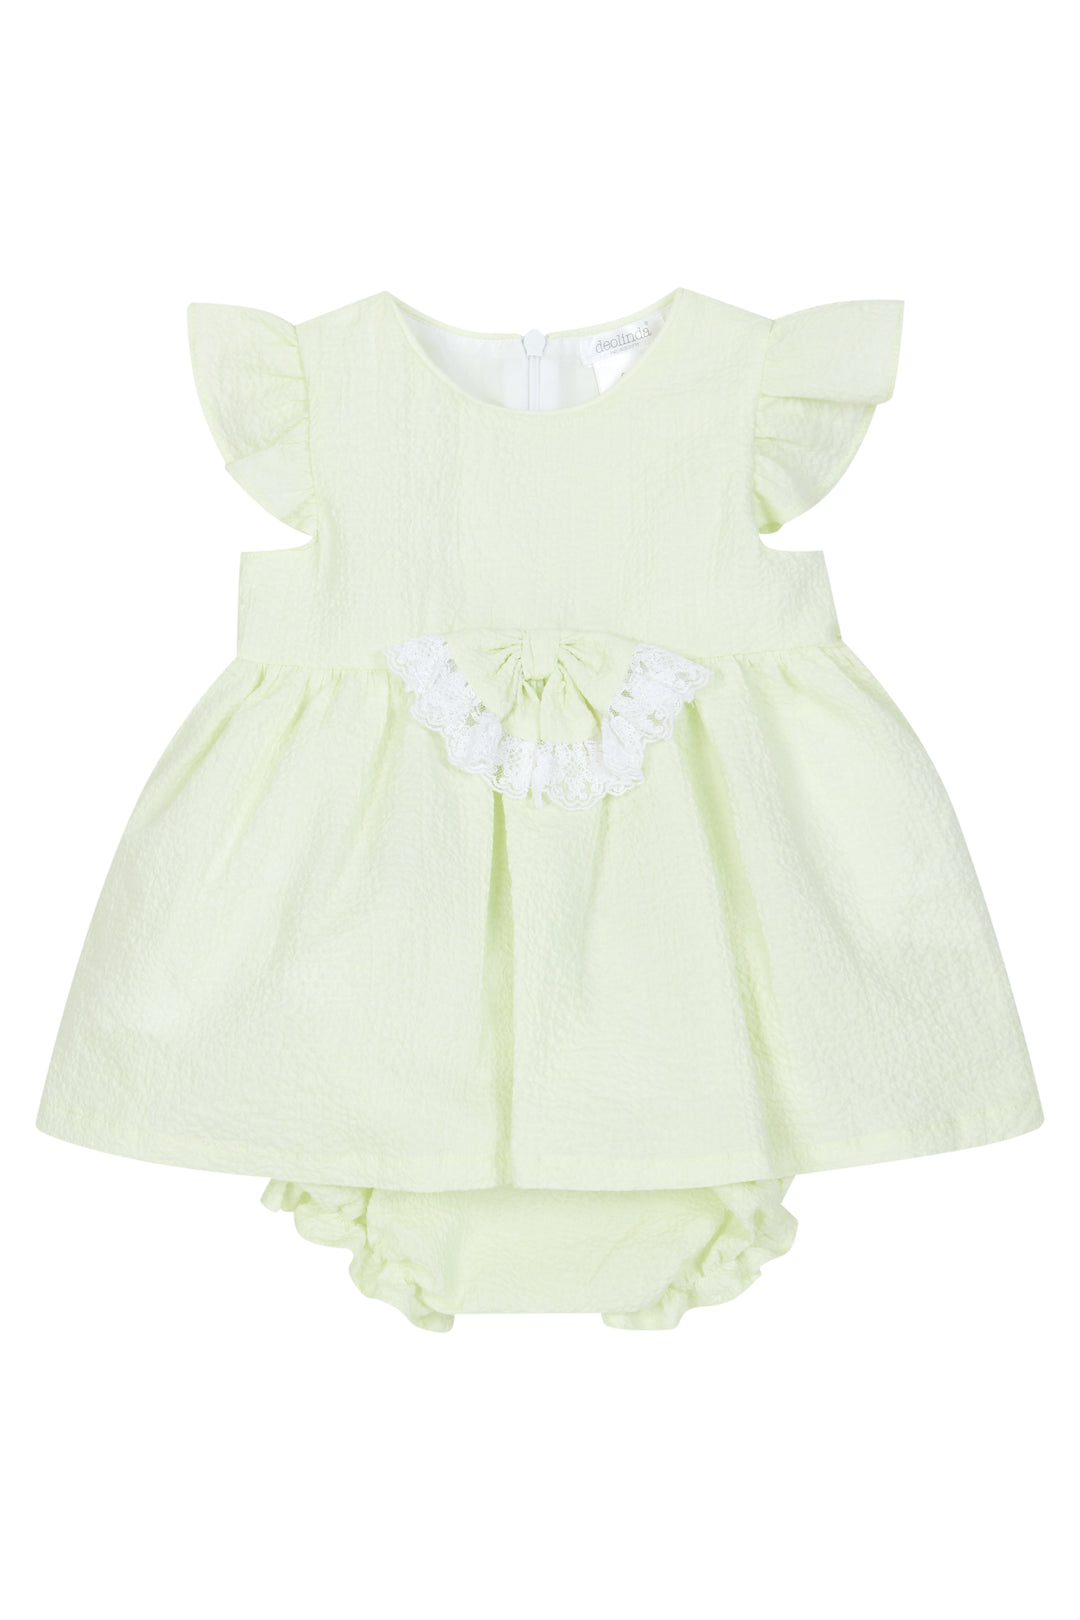 Deolinda PREORDER "Idalia" Pale Green Lace Dress & Bloomers | Millie and John